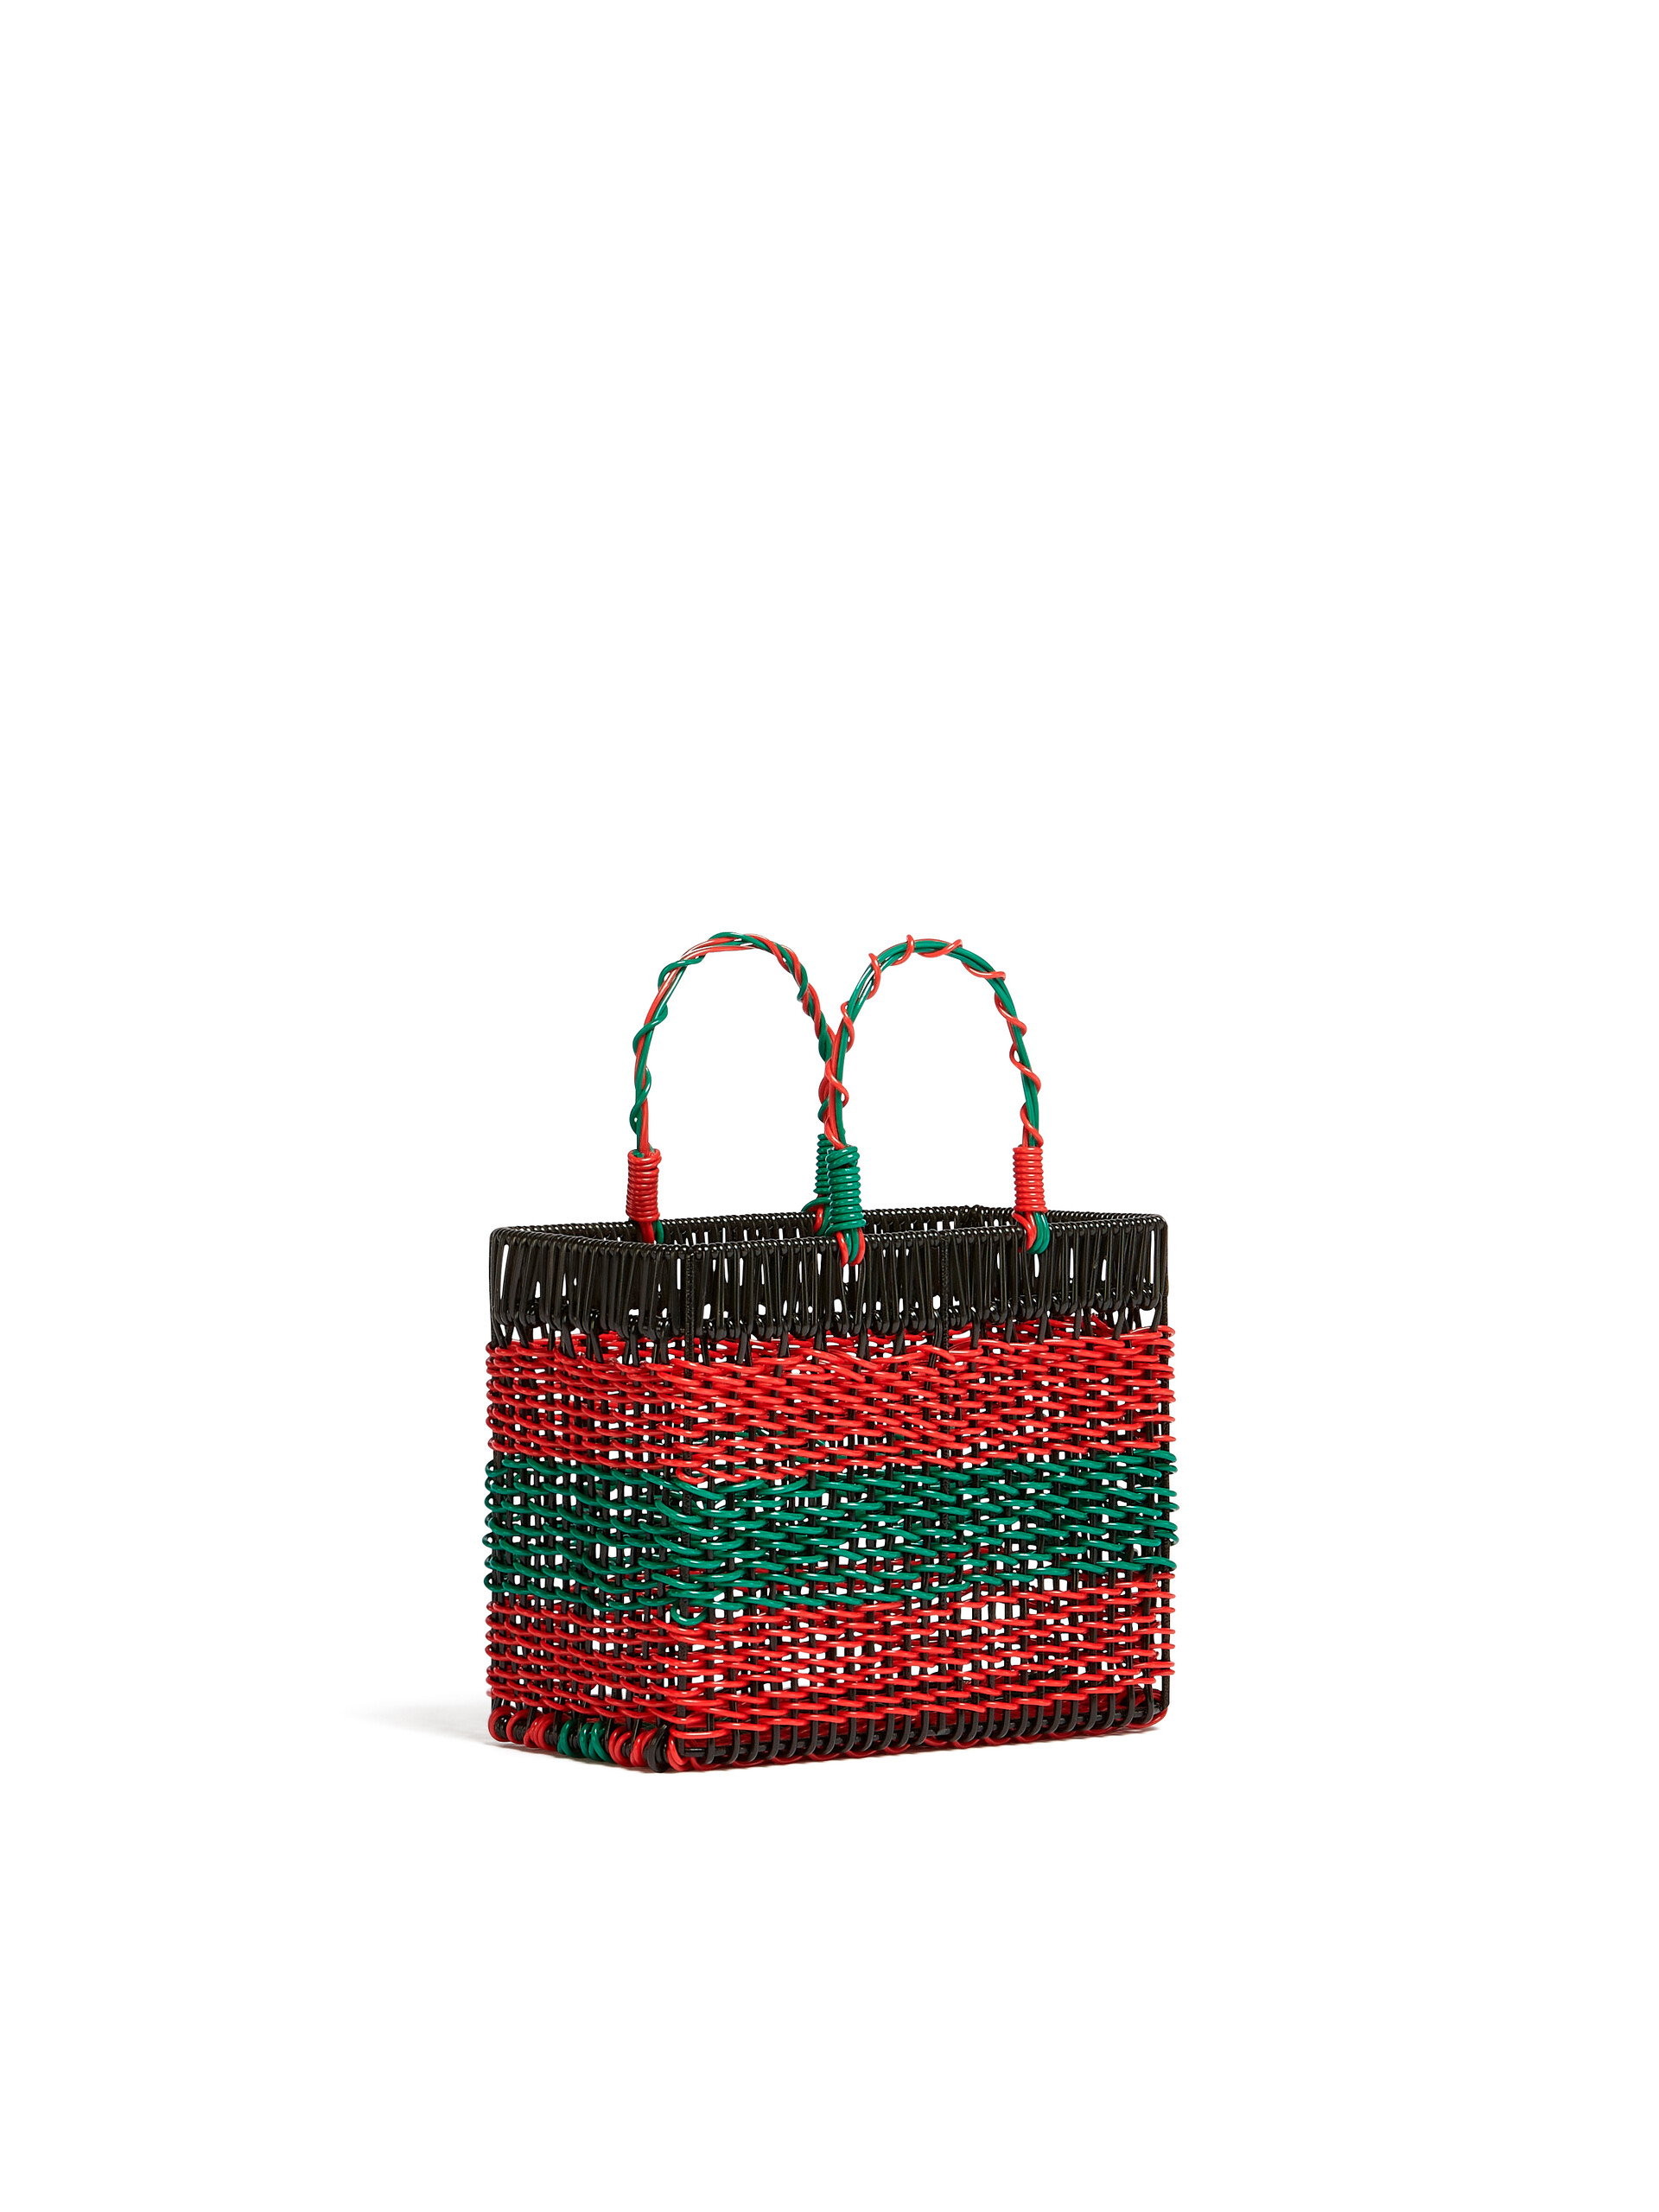 MARNI MARKET green and red basket - Accessories - Image 2